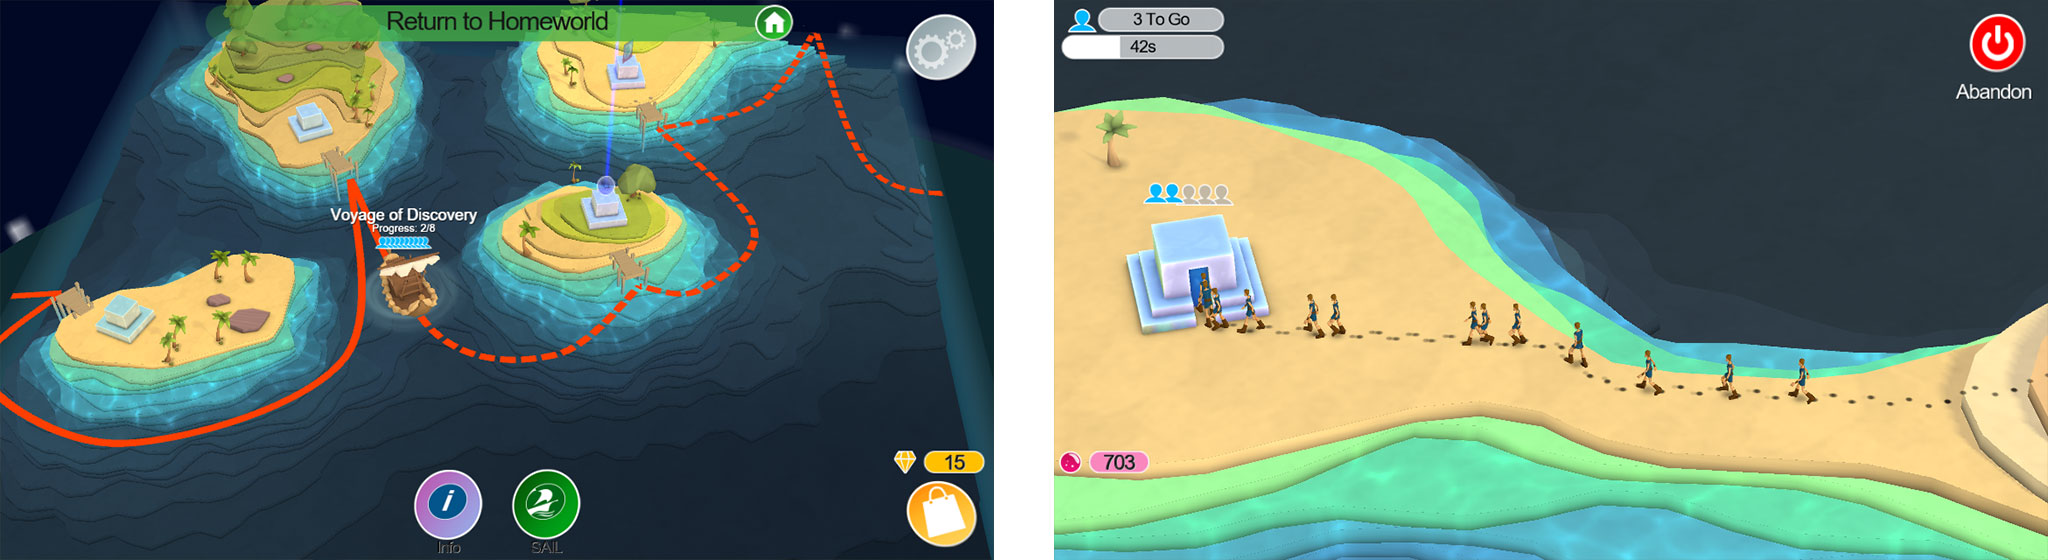 Godus: Top 10 tips, hints, and cheats you need to know!